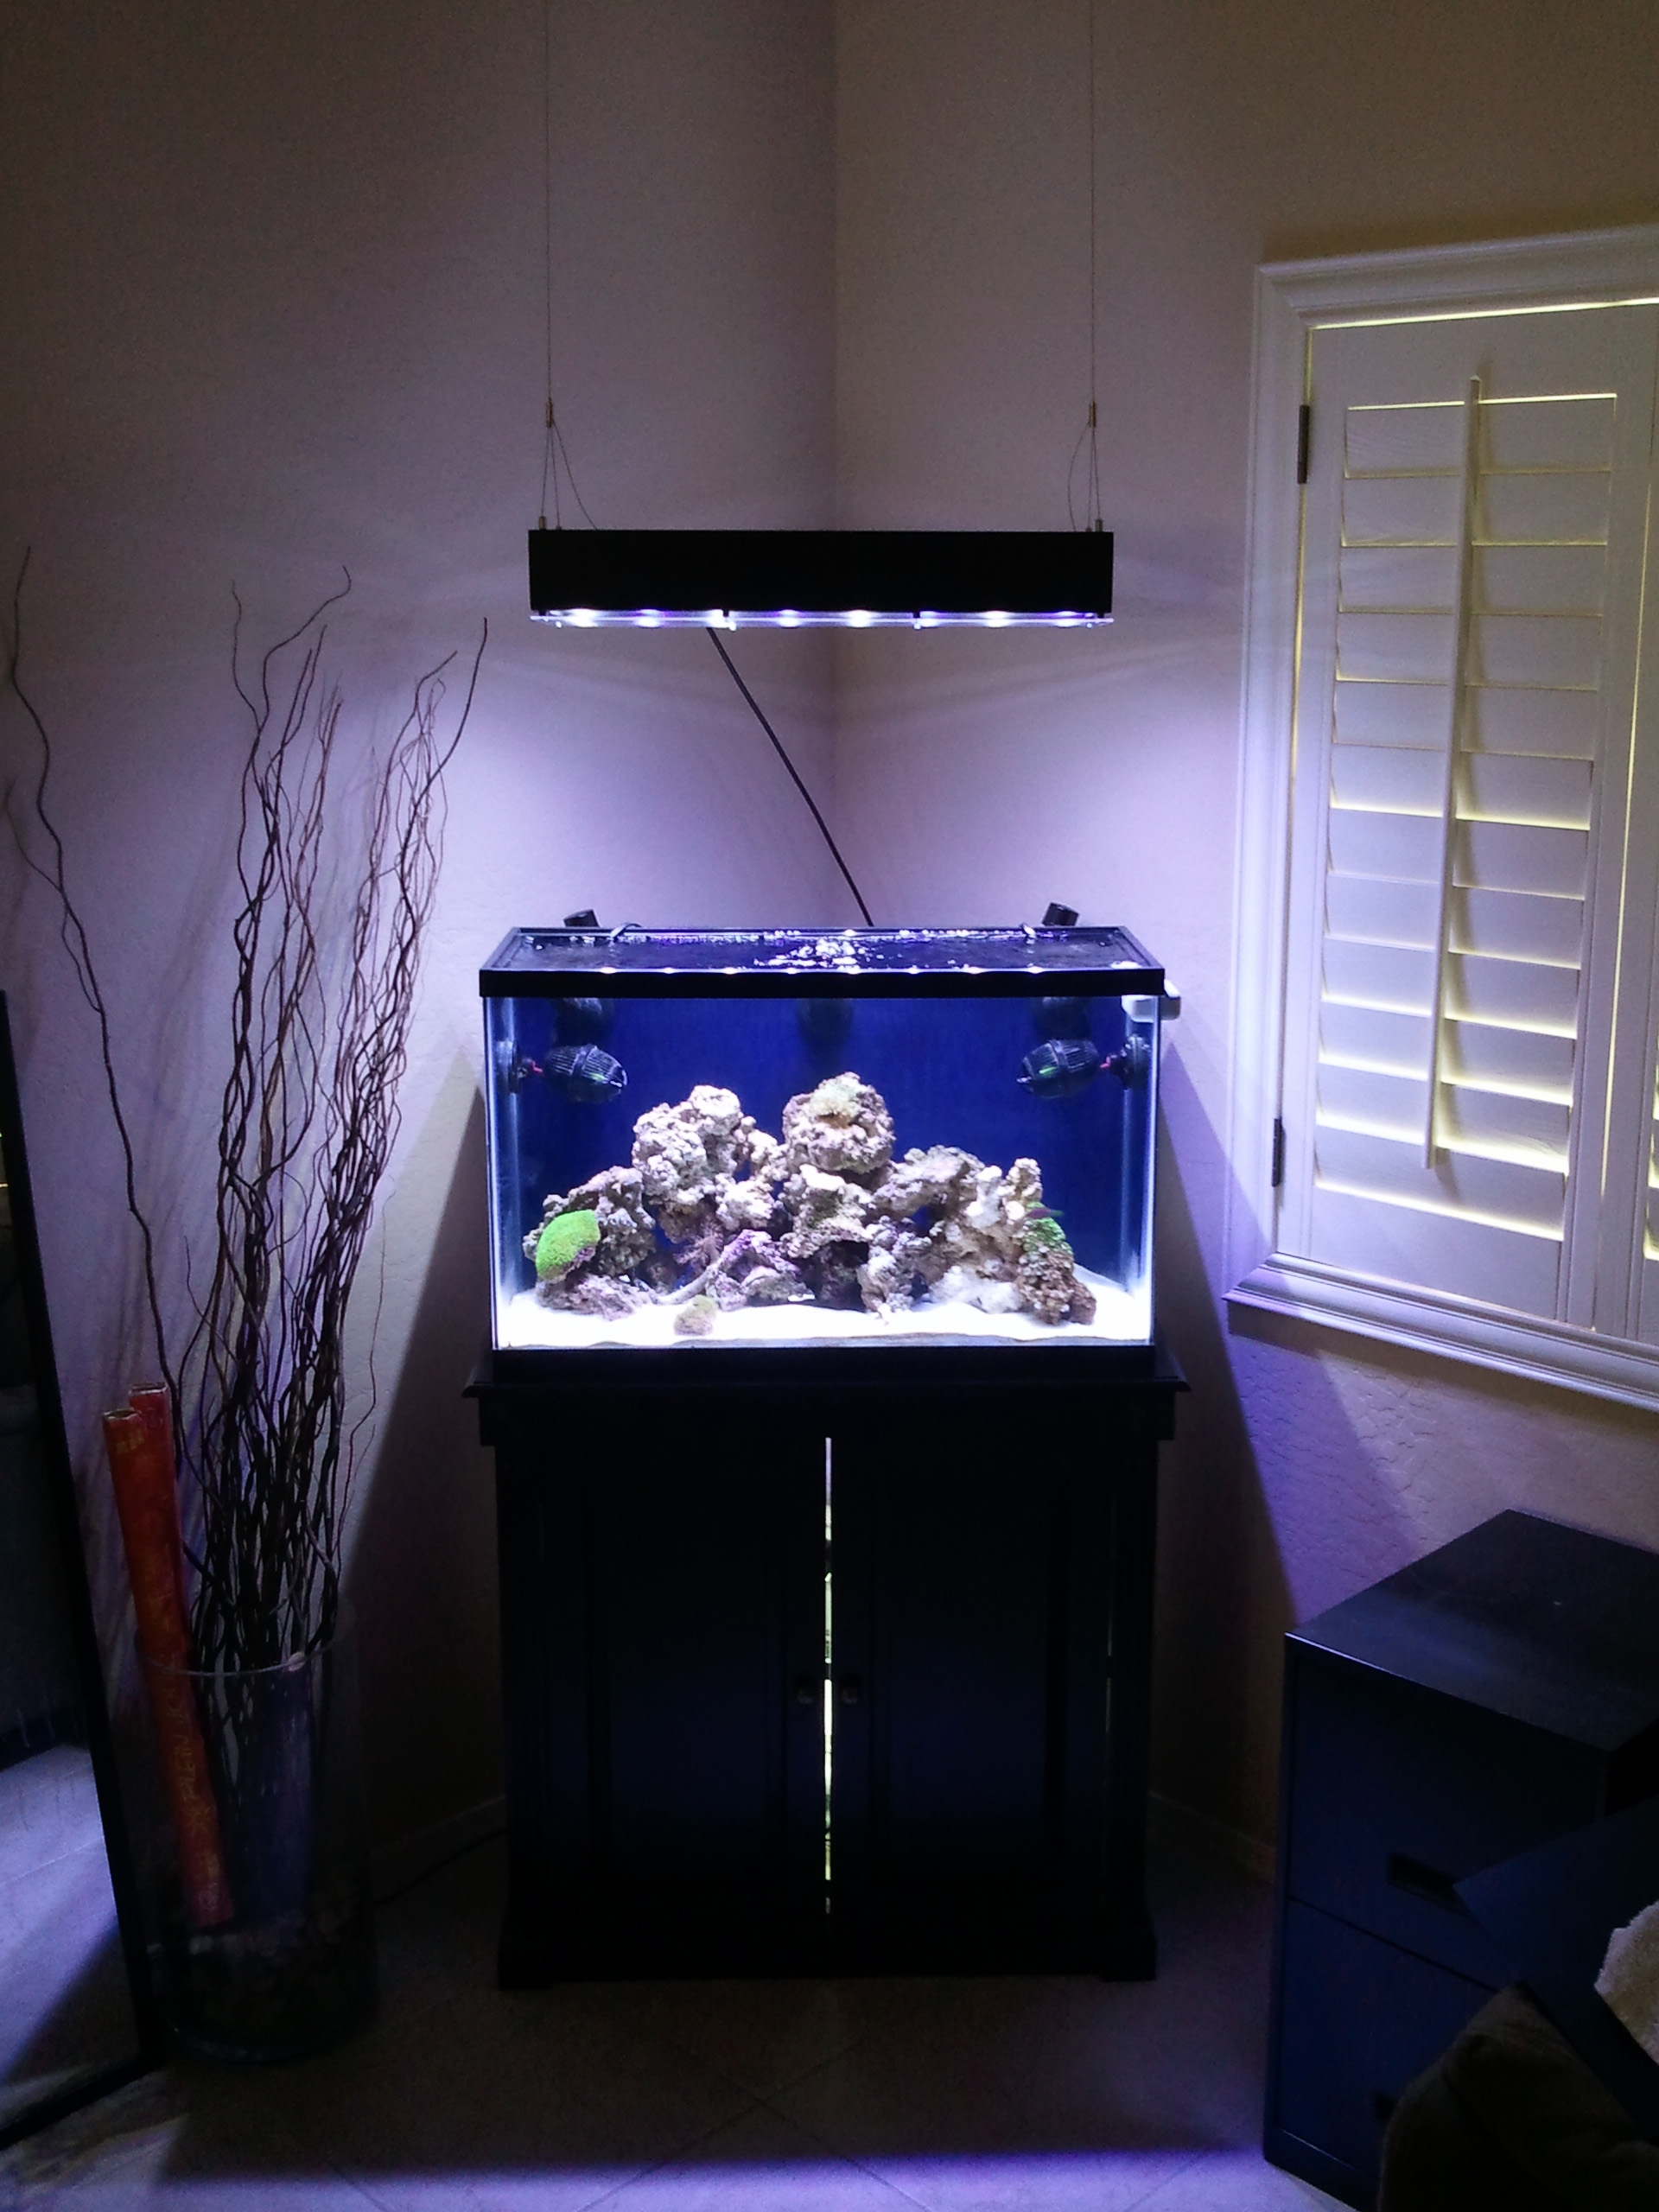 Hanging Aquarium Light From Ceilinglight hangers motivation and inspiration needed diy projects